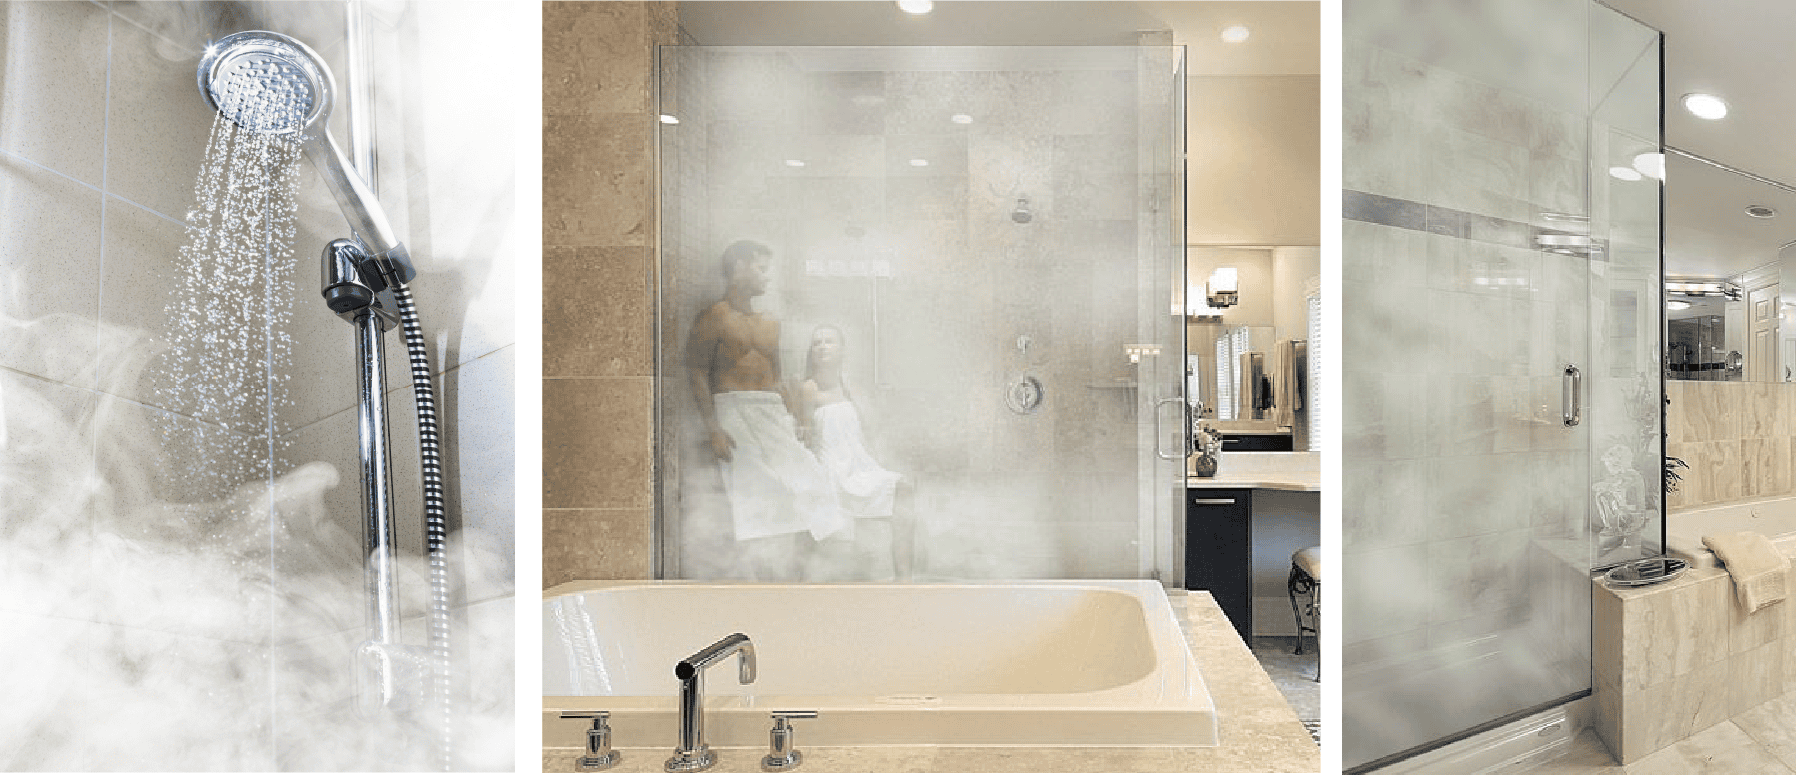 Three images of showers flush with steam in beige bathrooms